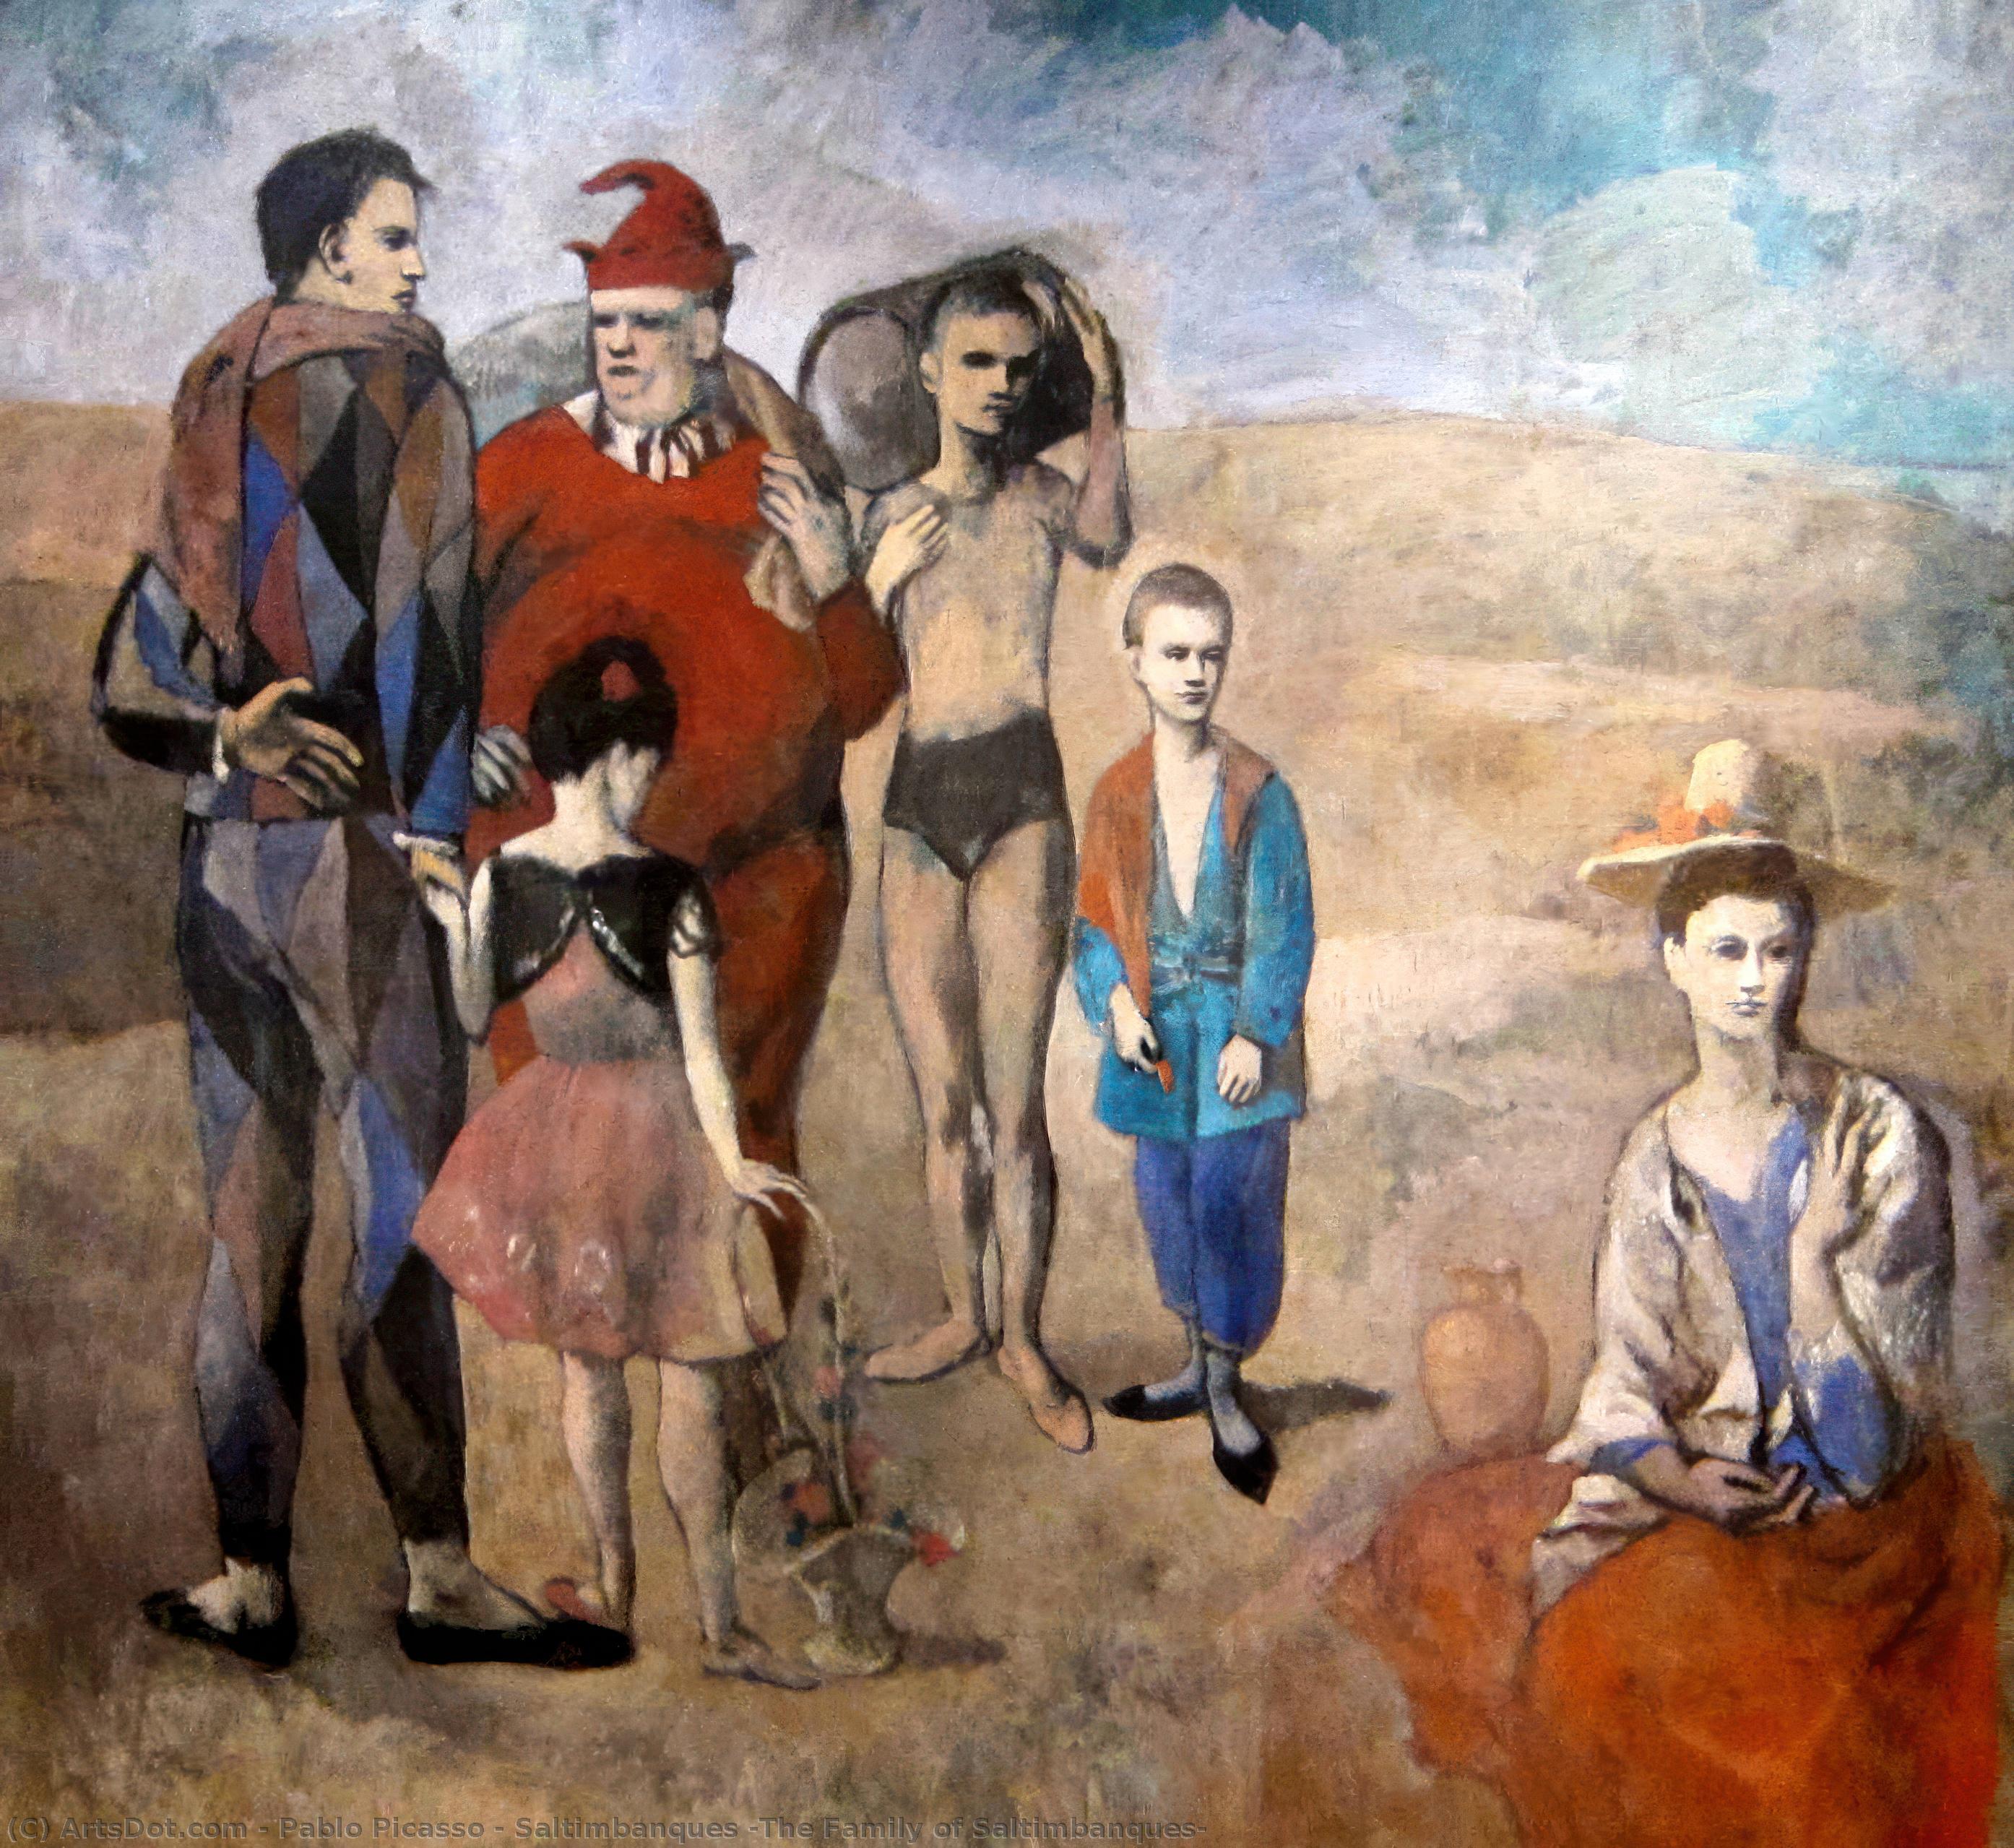 WikiOO.org - Encyclopedia of Fine Arts - Malba, Artwork Pablo Picasso - Saltimbanques (The Family of Saltimbanques)